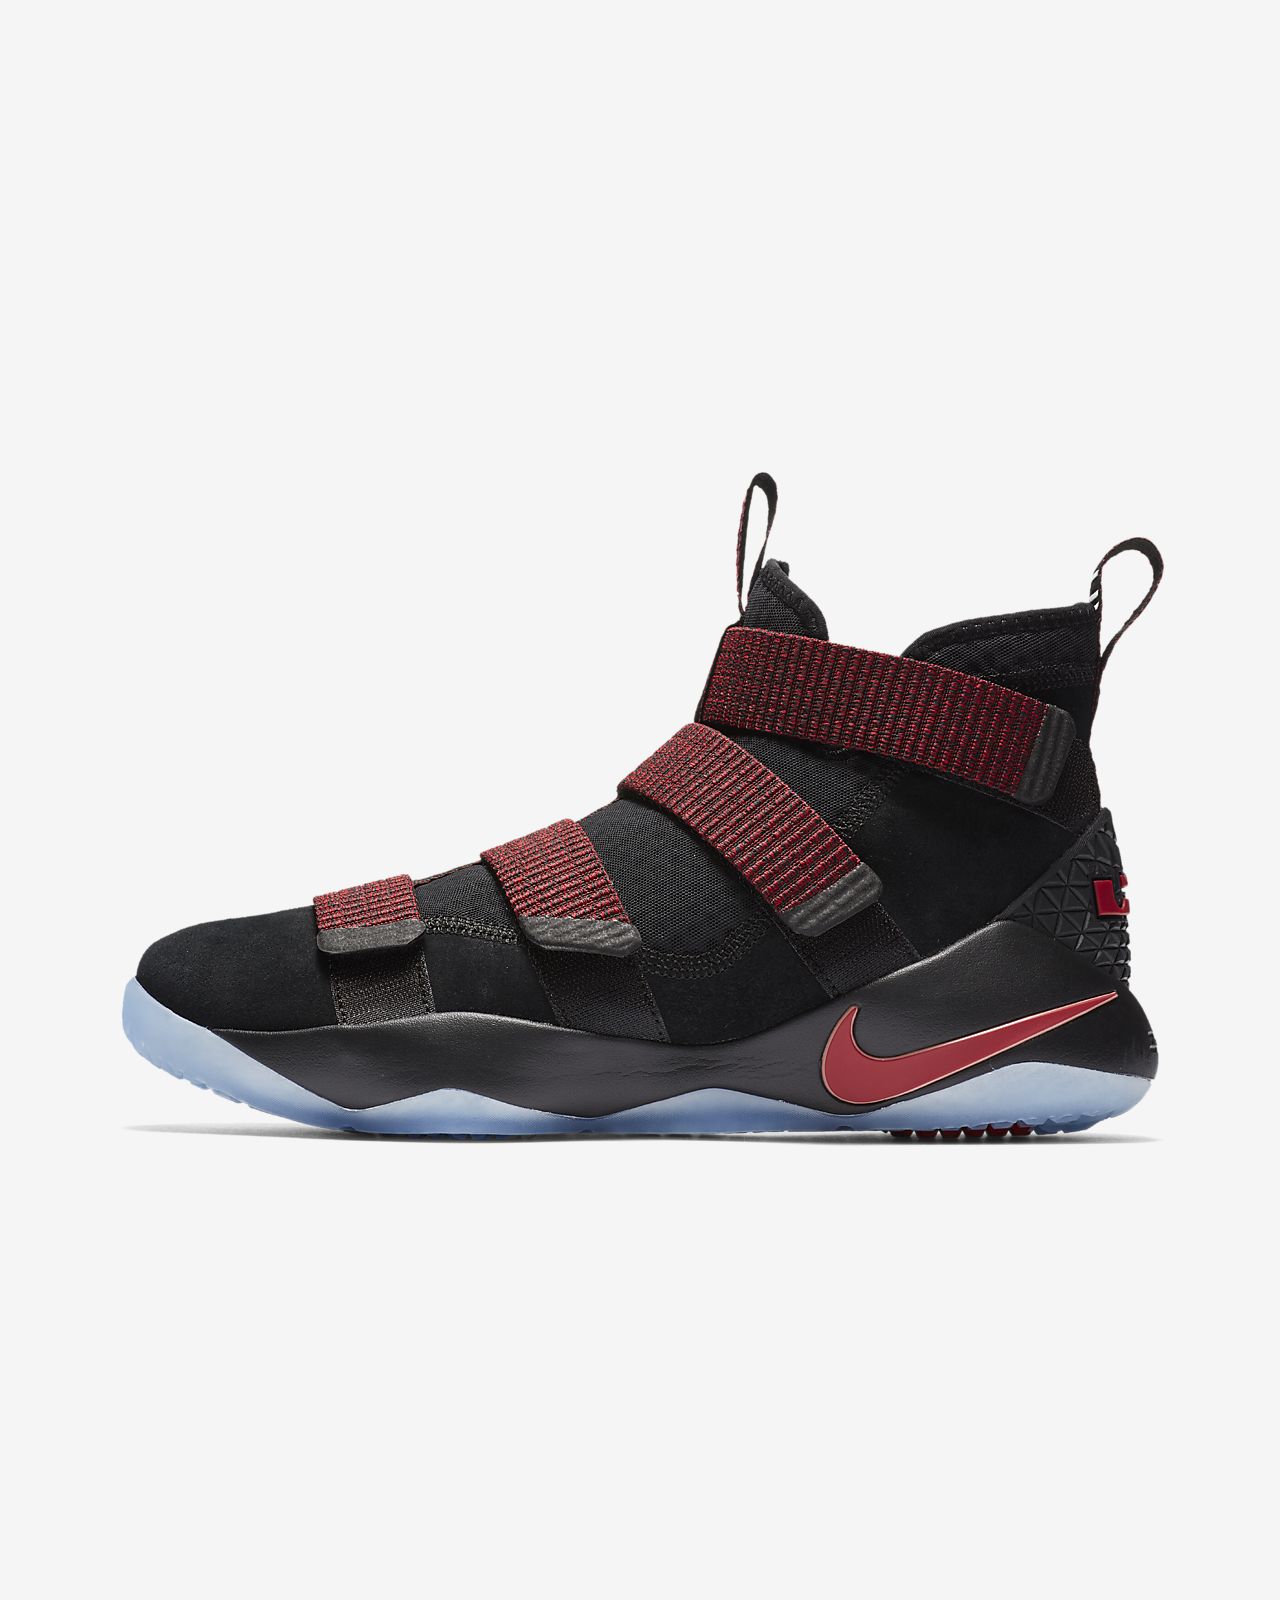 lebron soldier 11 basketball shoes